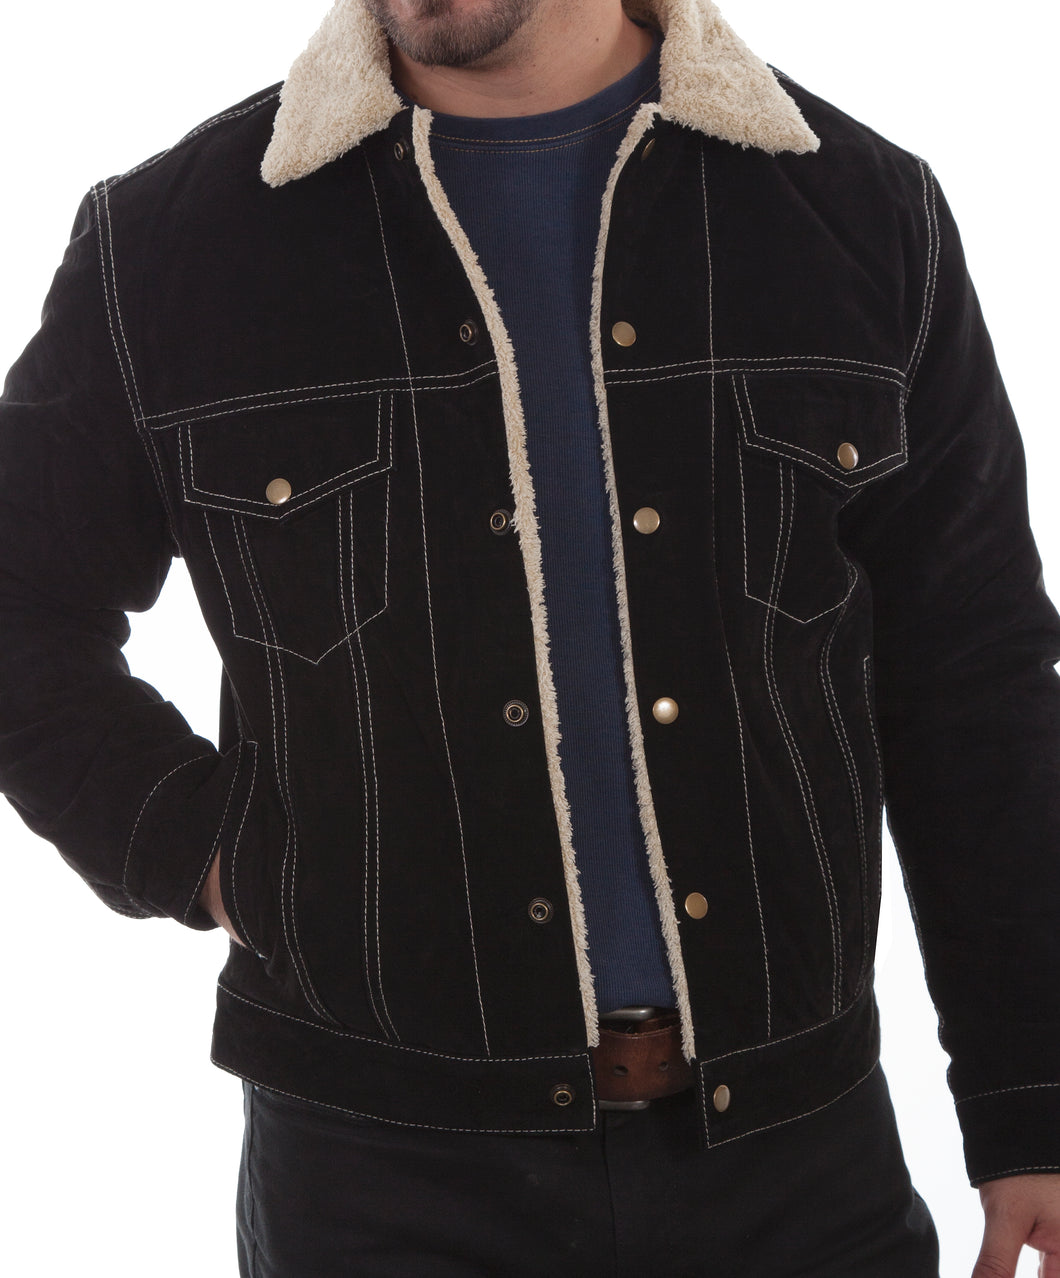 Man-Wearing-Suede-Leather-Shearling-Jacket-by-Scully-113